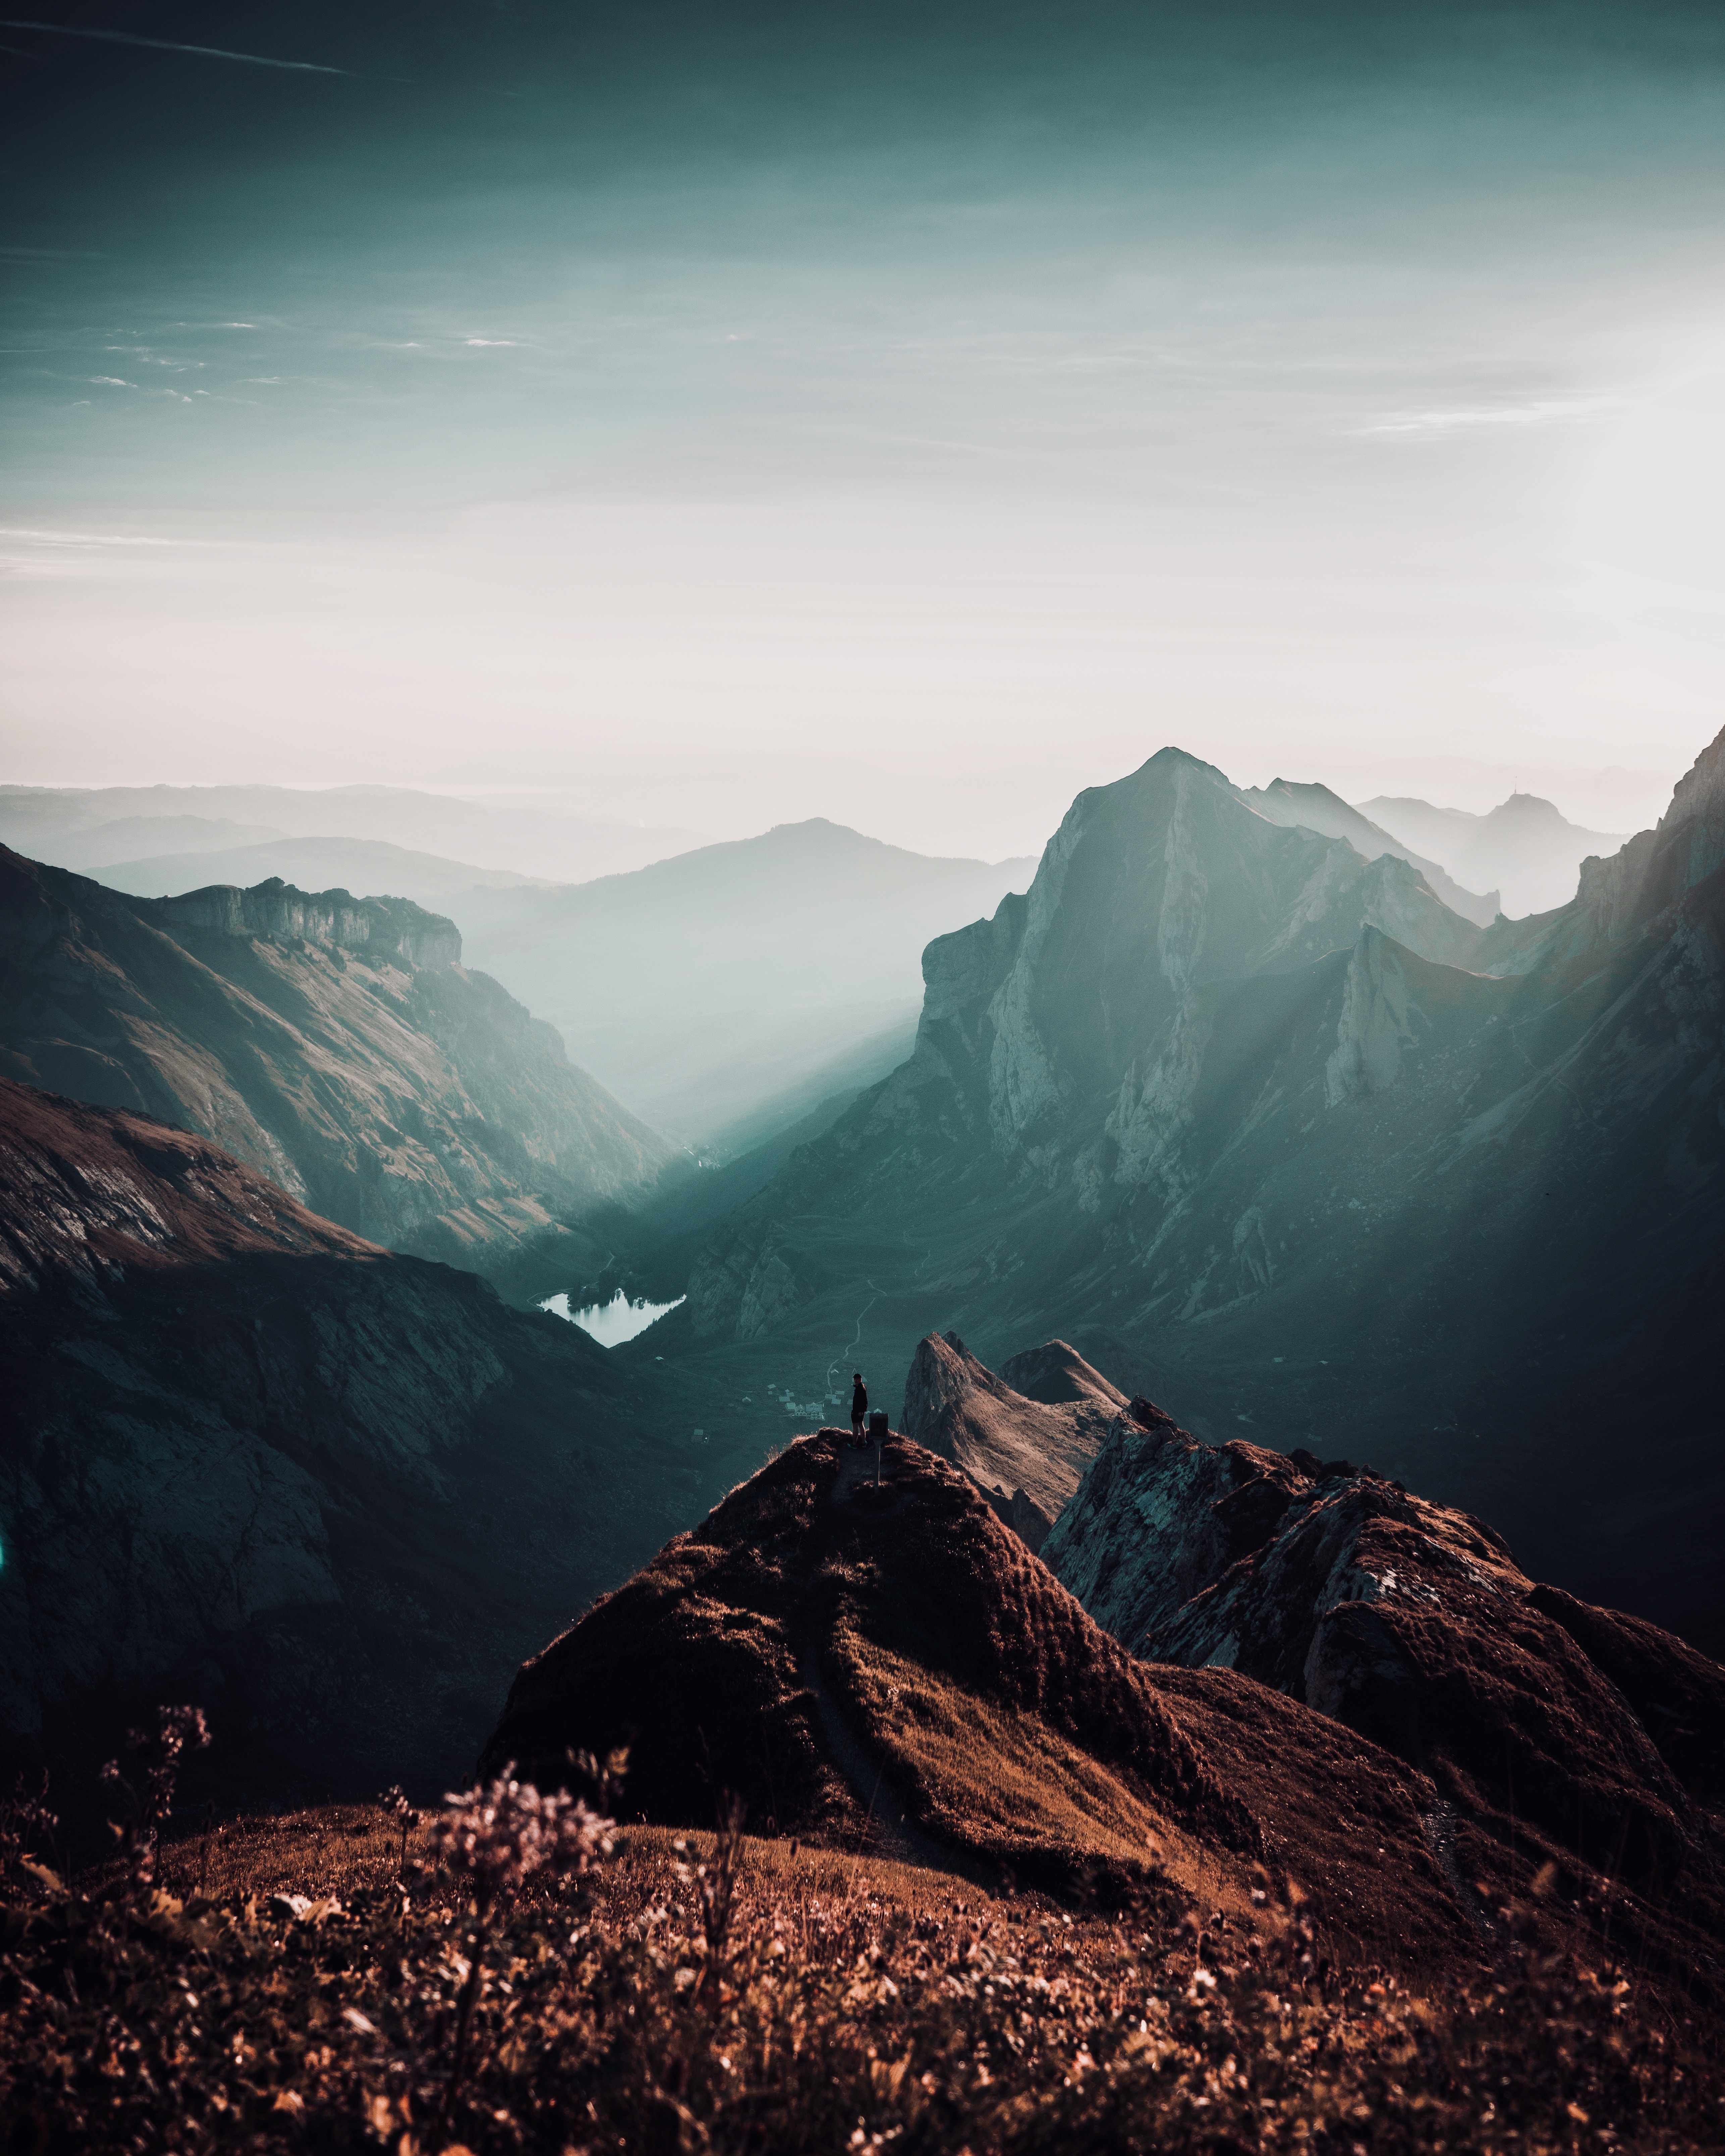 tops, loneliness, nature, privacy, mountains, vertex, seclusion, switzerland Aesthetic wallpaper